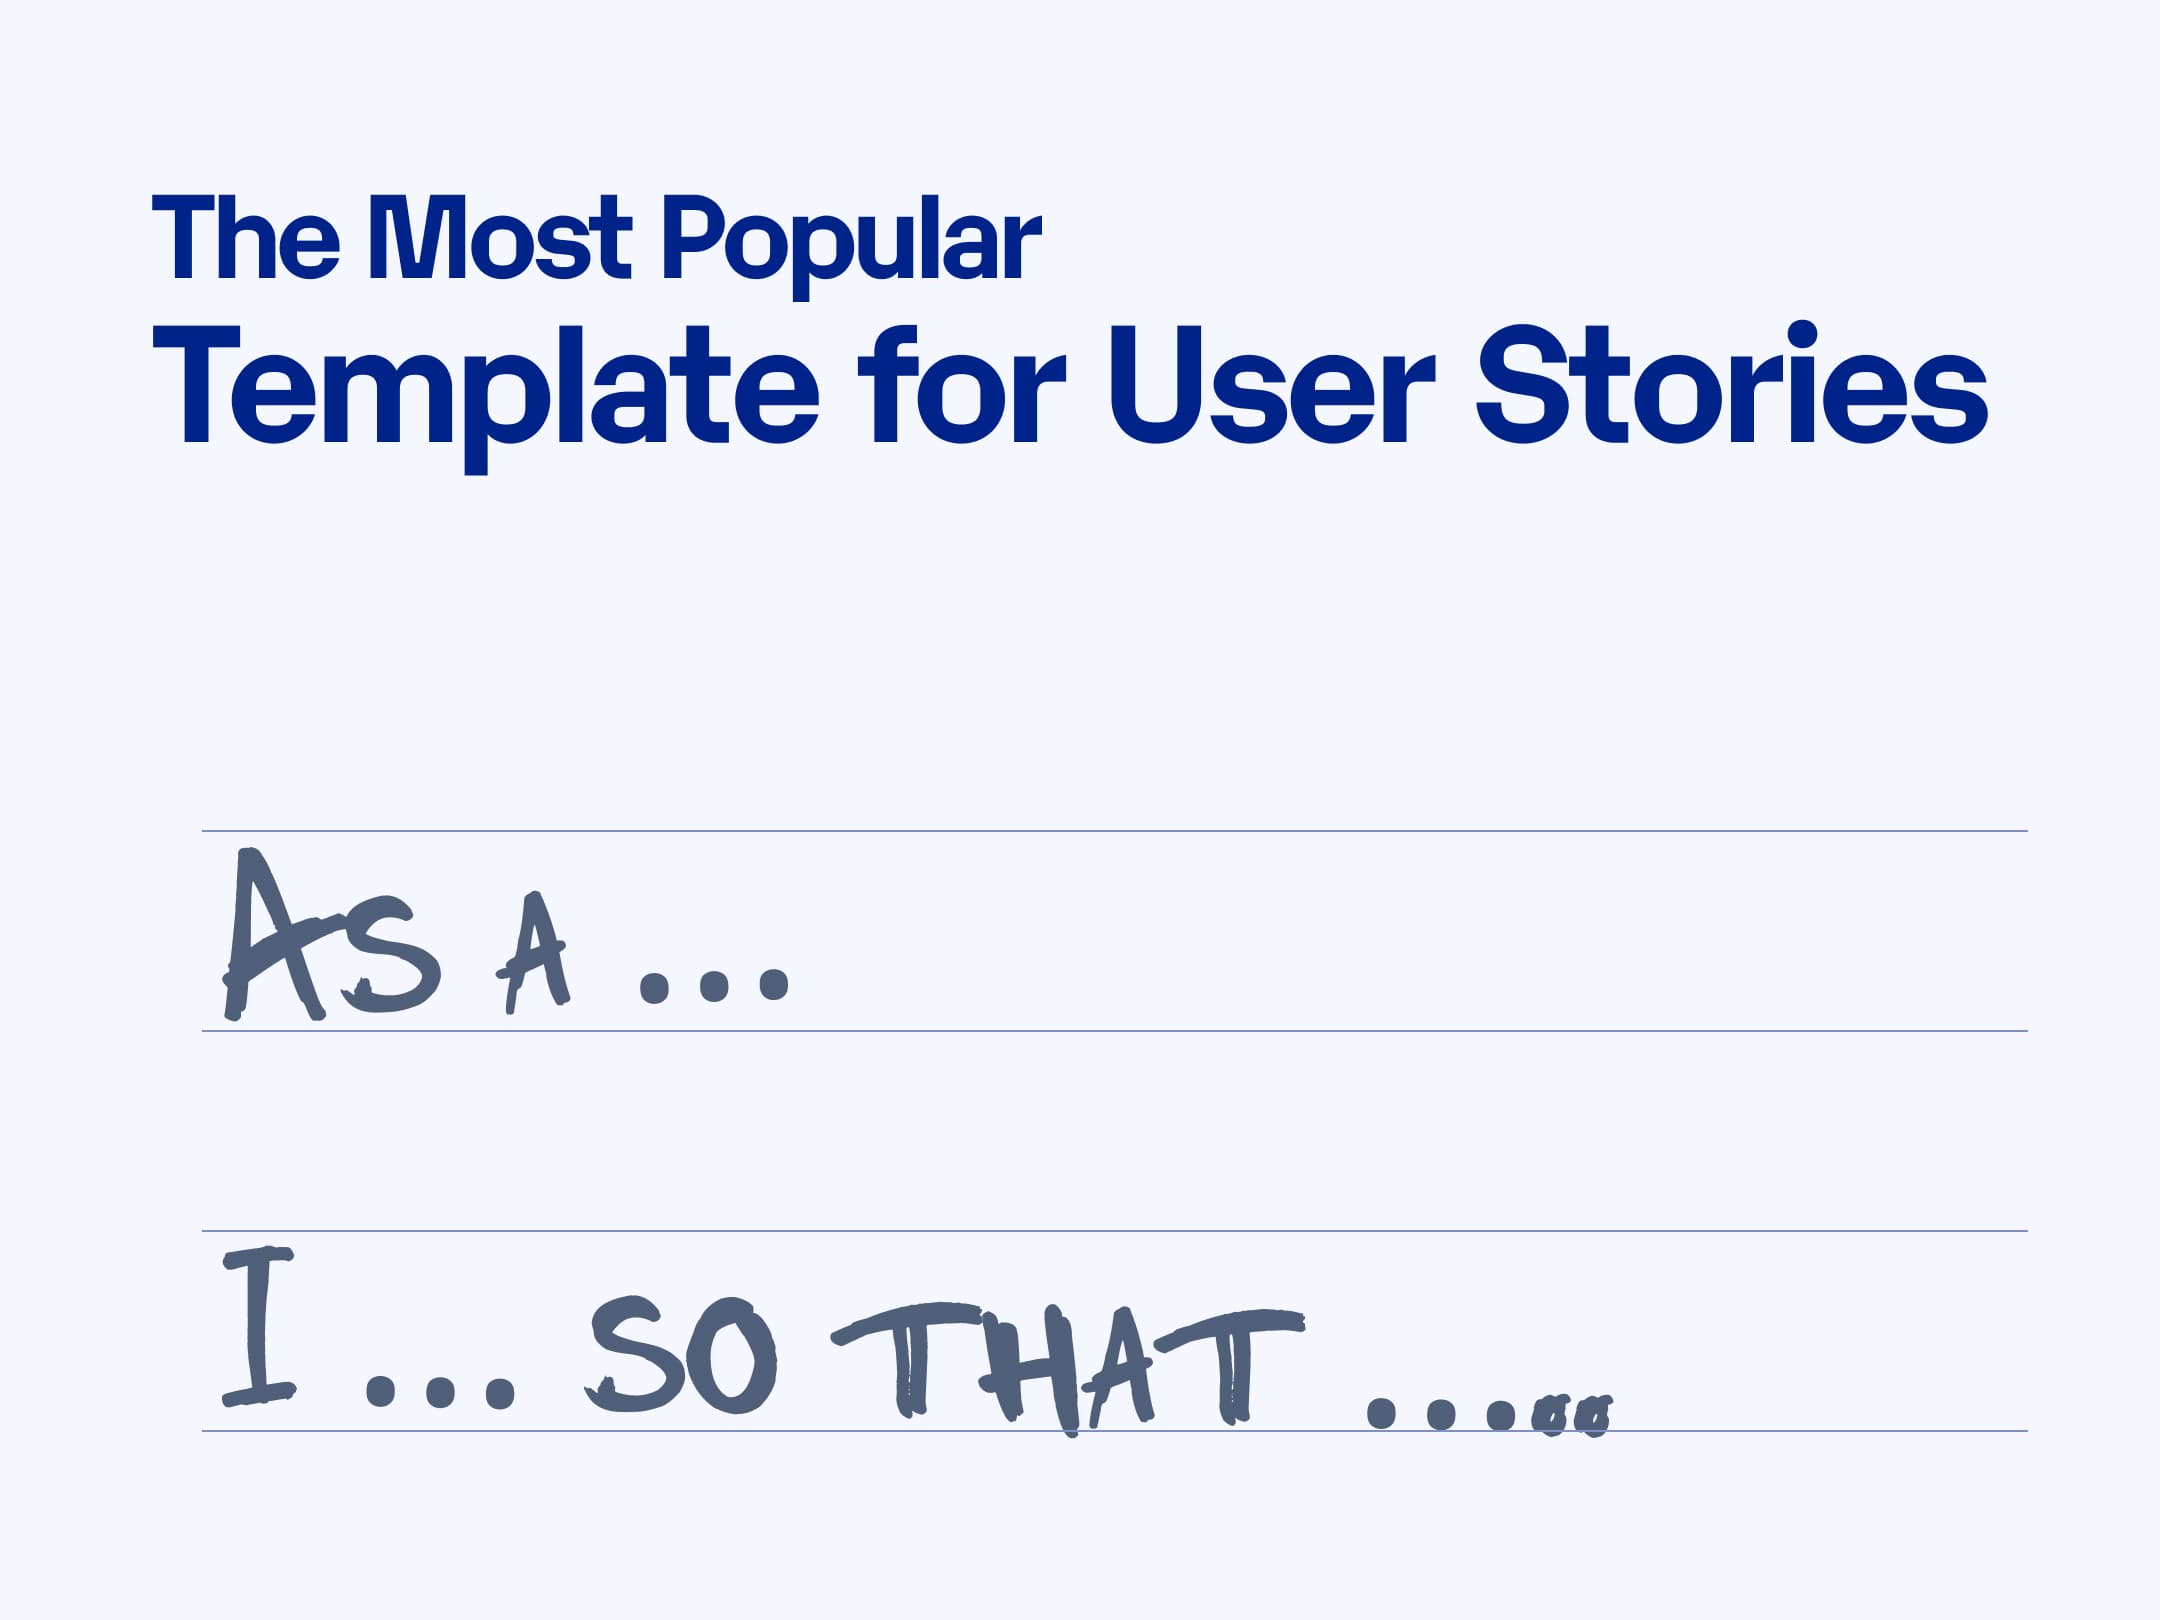 The Most Popular Template for User Stories